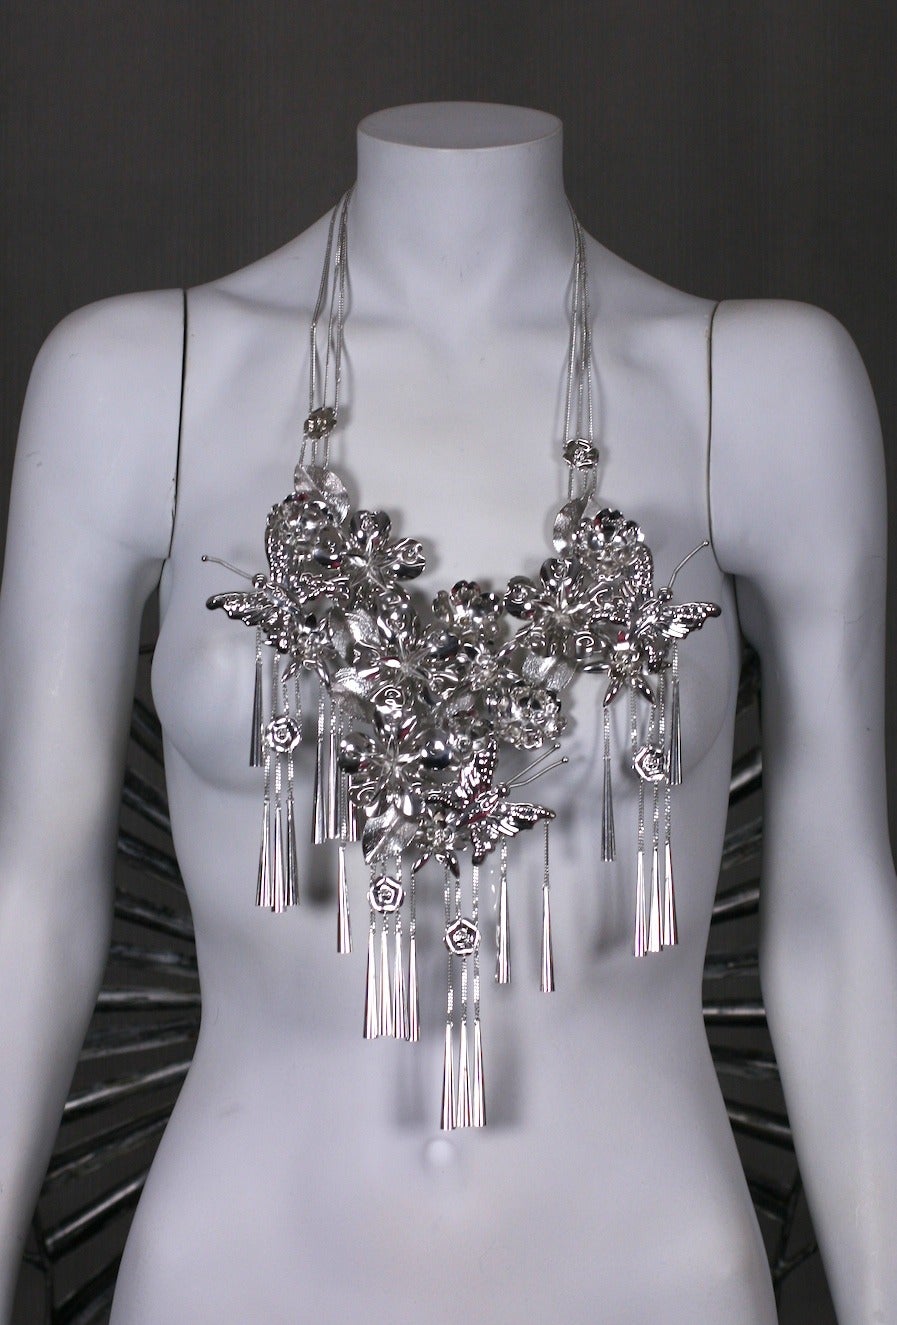 Enormous Chinese Butterfly Breastplate necklace by John Galliano for Christian Dior Autumn/Winter 2003-04. This RTW collection follows in the steps of the Spring/Summer 2003 Haute Couture where mad hatter Galliano travels through Asia via the